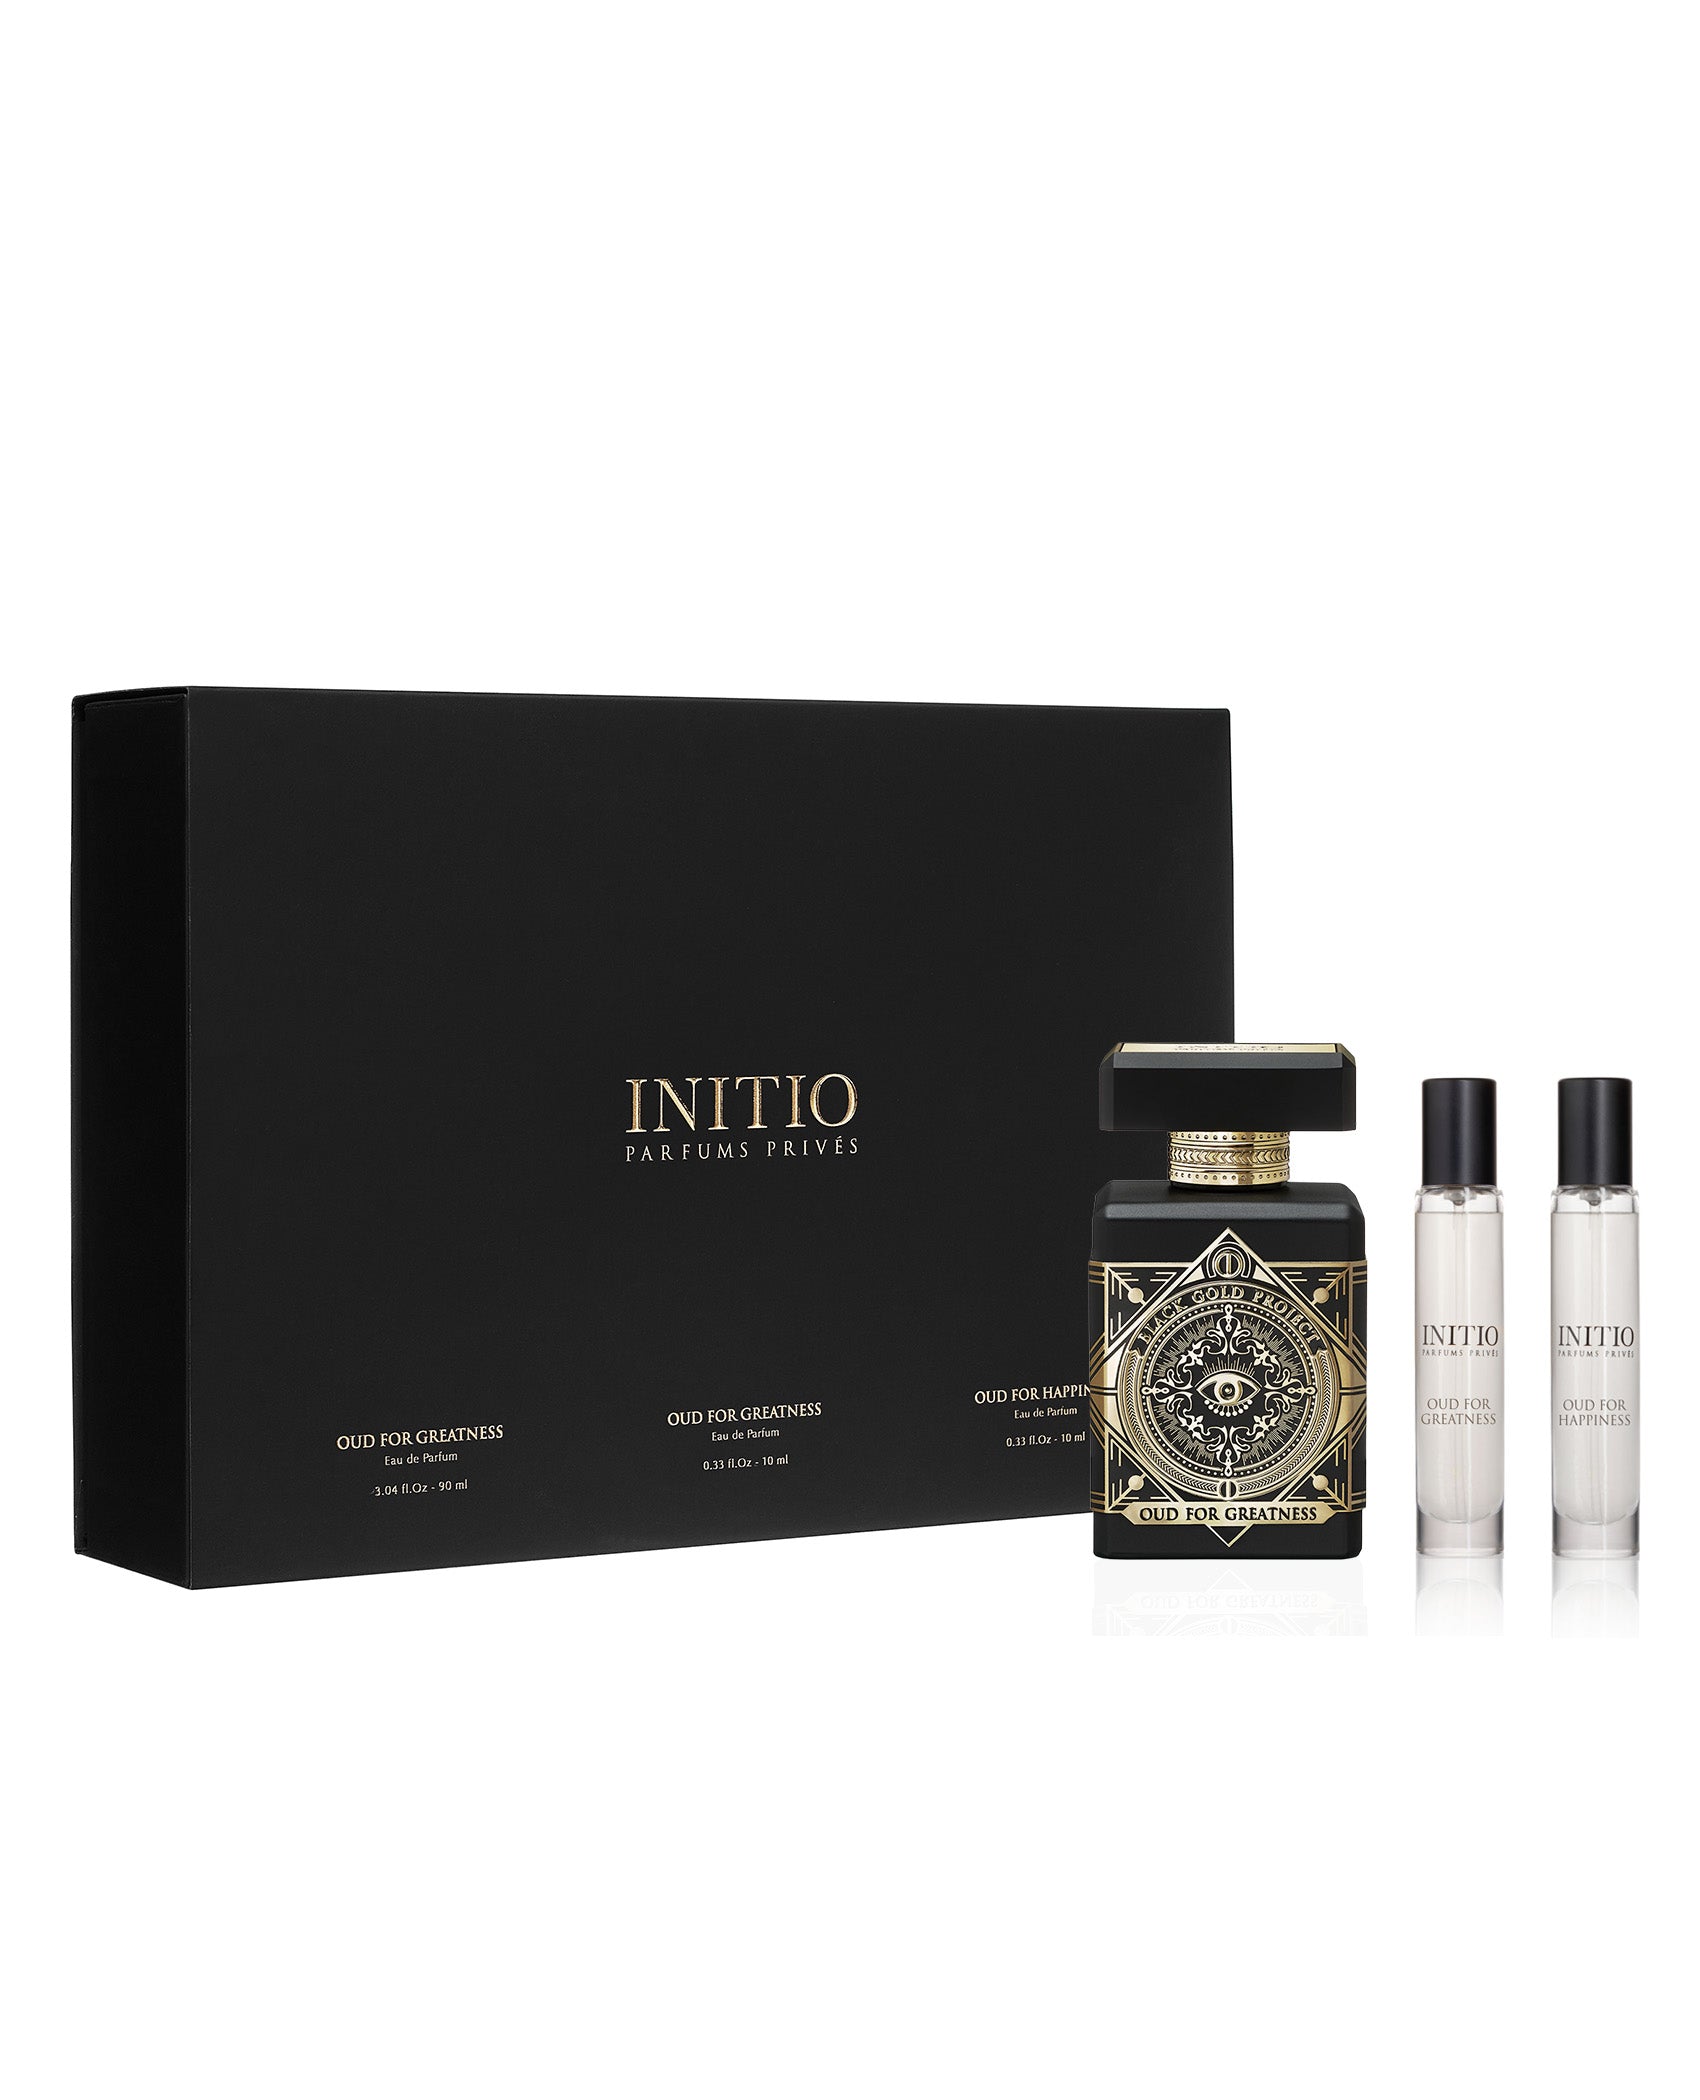 OUD FOR GREATNESS LIMITED EDITION SET